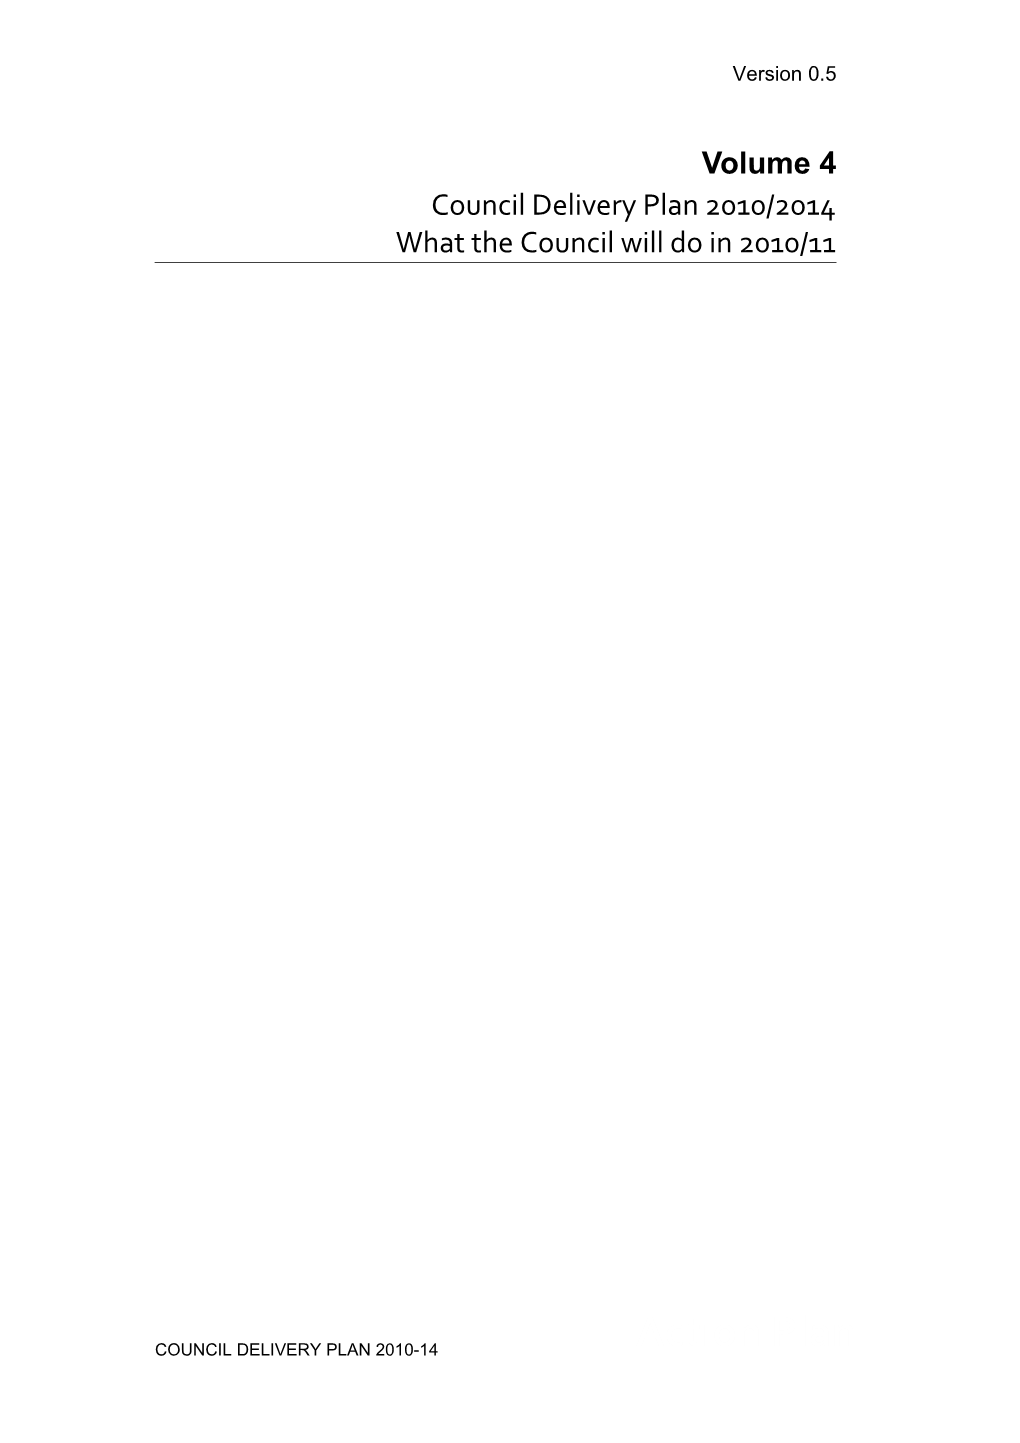 What the Council Will Do in 2010/11